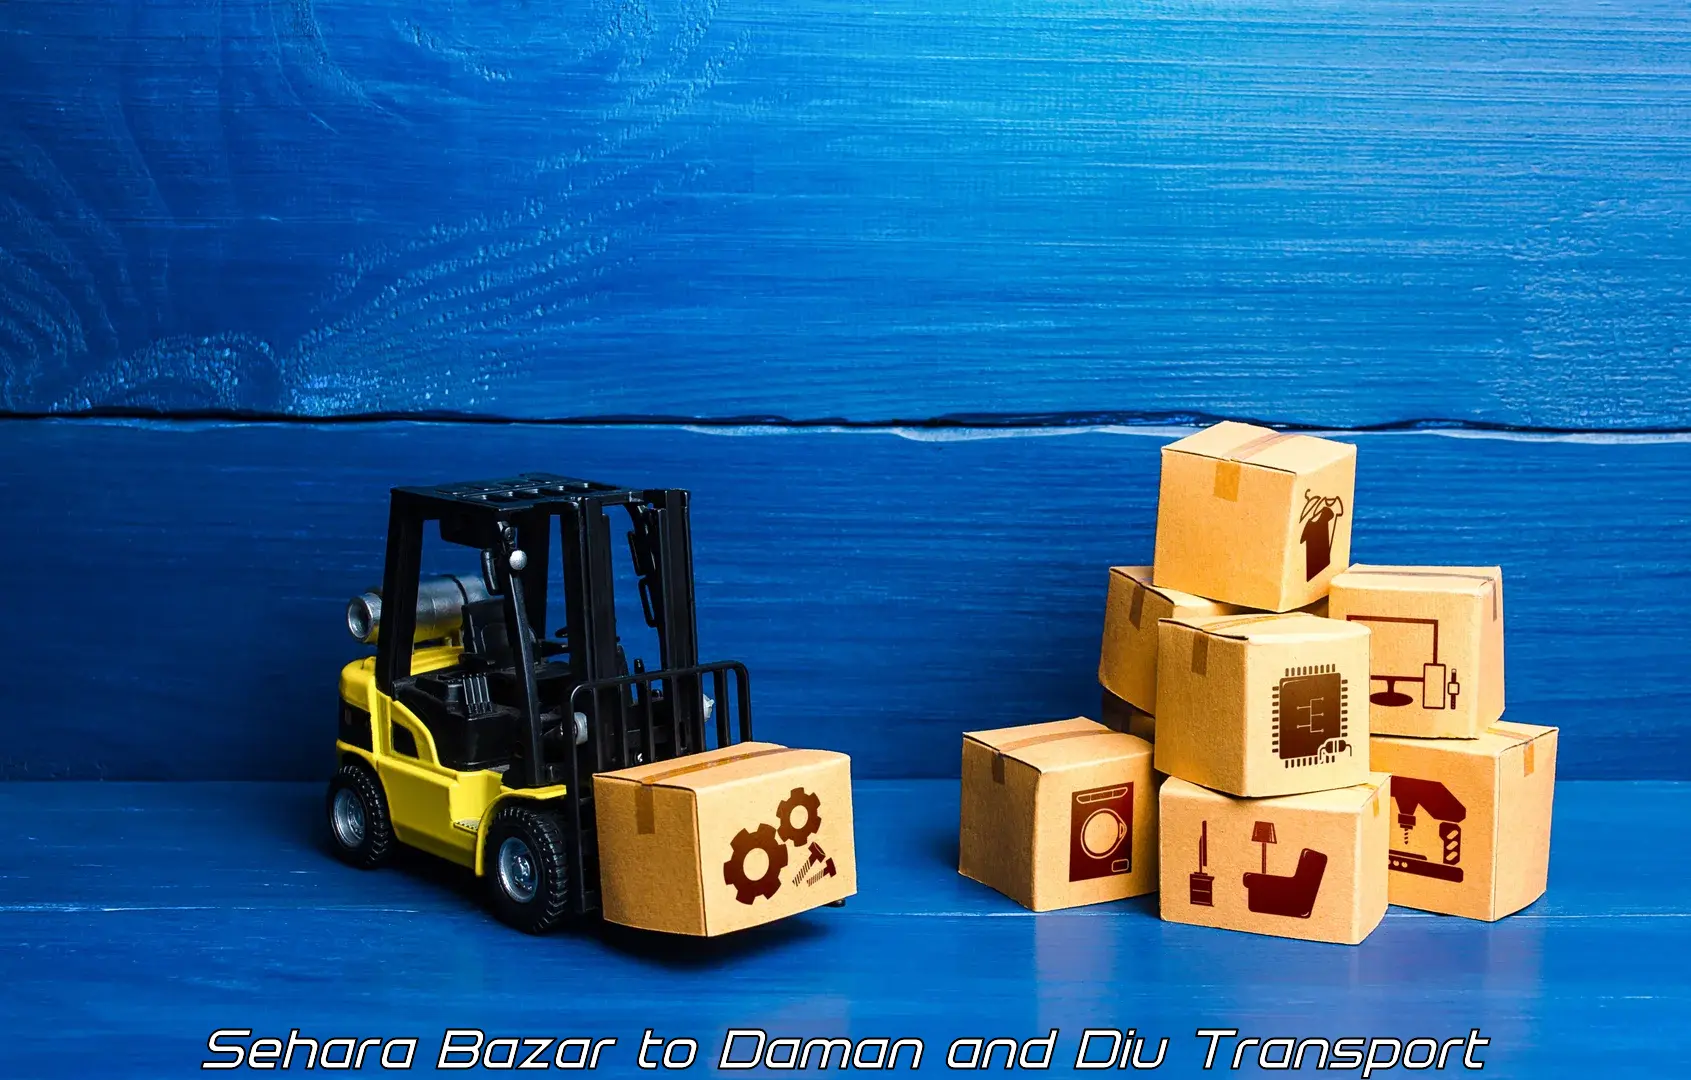 Commercial transport service Sehara Bazar to Daman and Diu